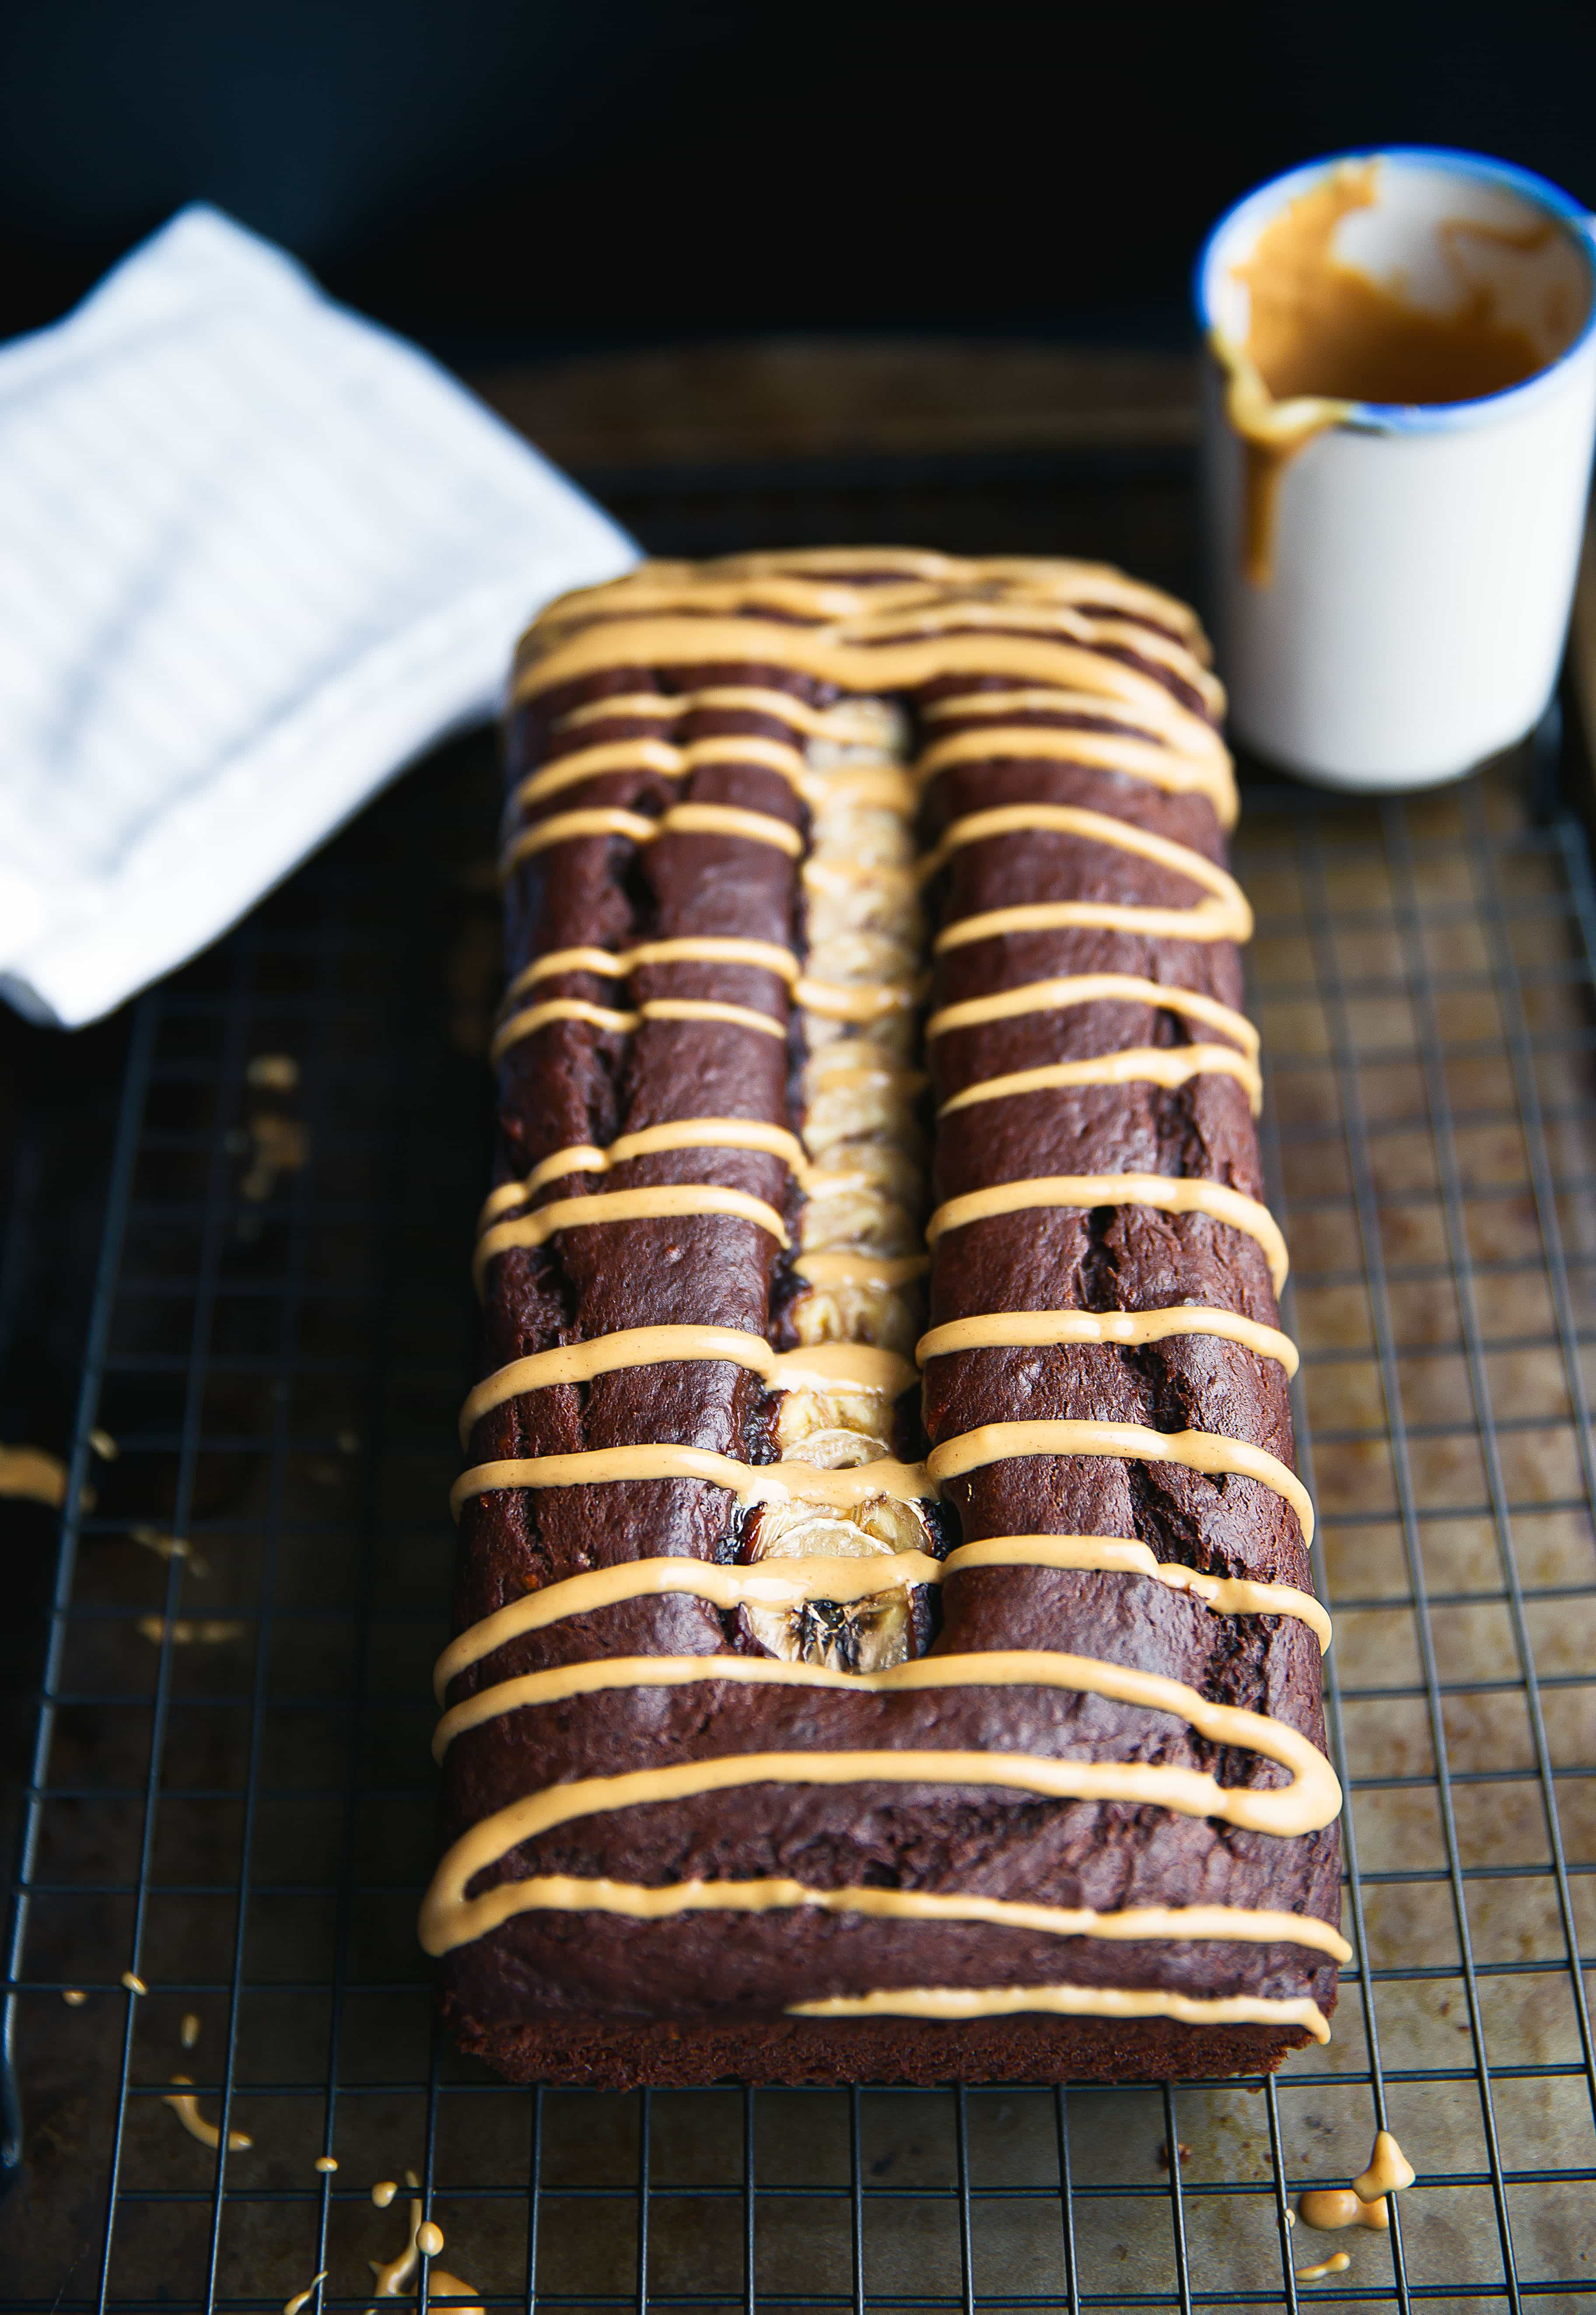 All my favorite flavors wrapped up into one quick bread? This decadent Peanut Butter Chocolate Banana Bread has us DROOLING.